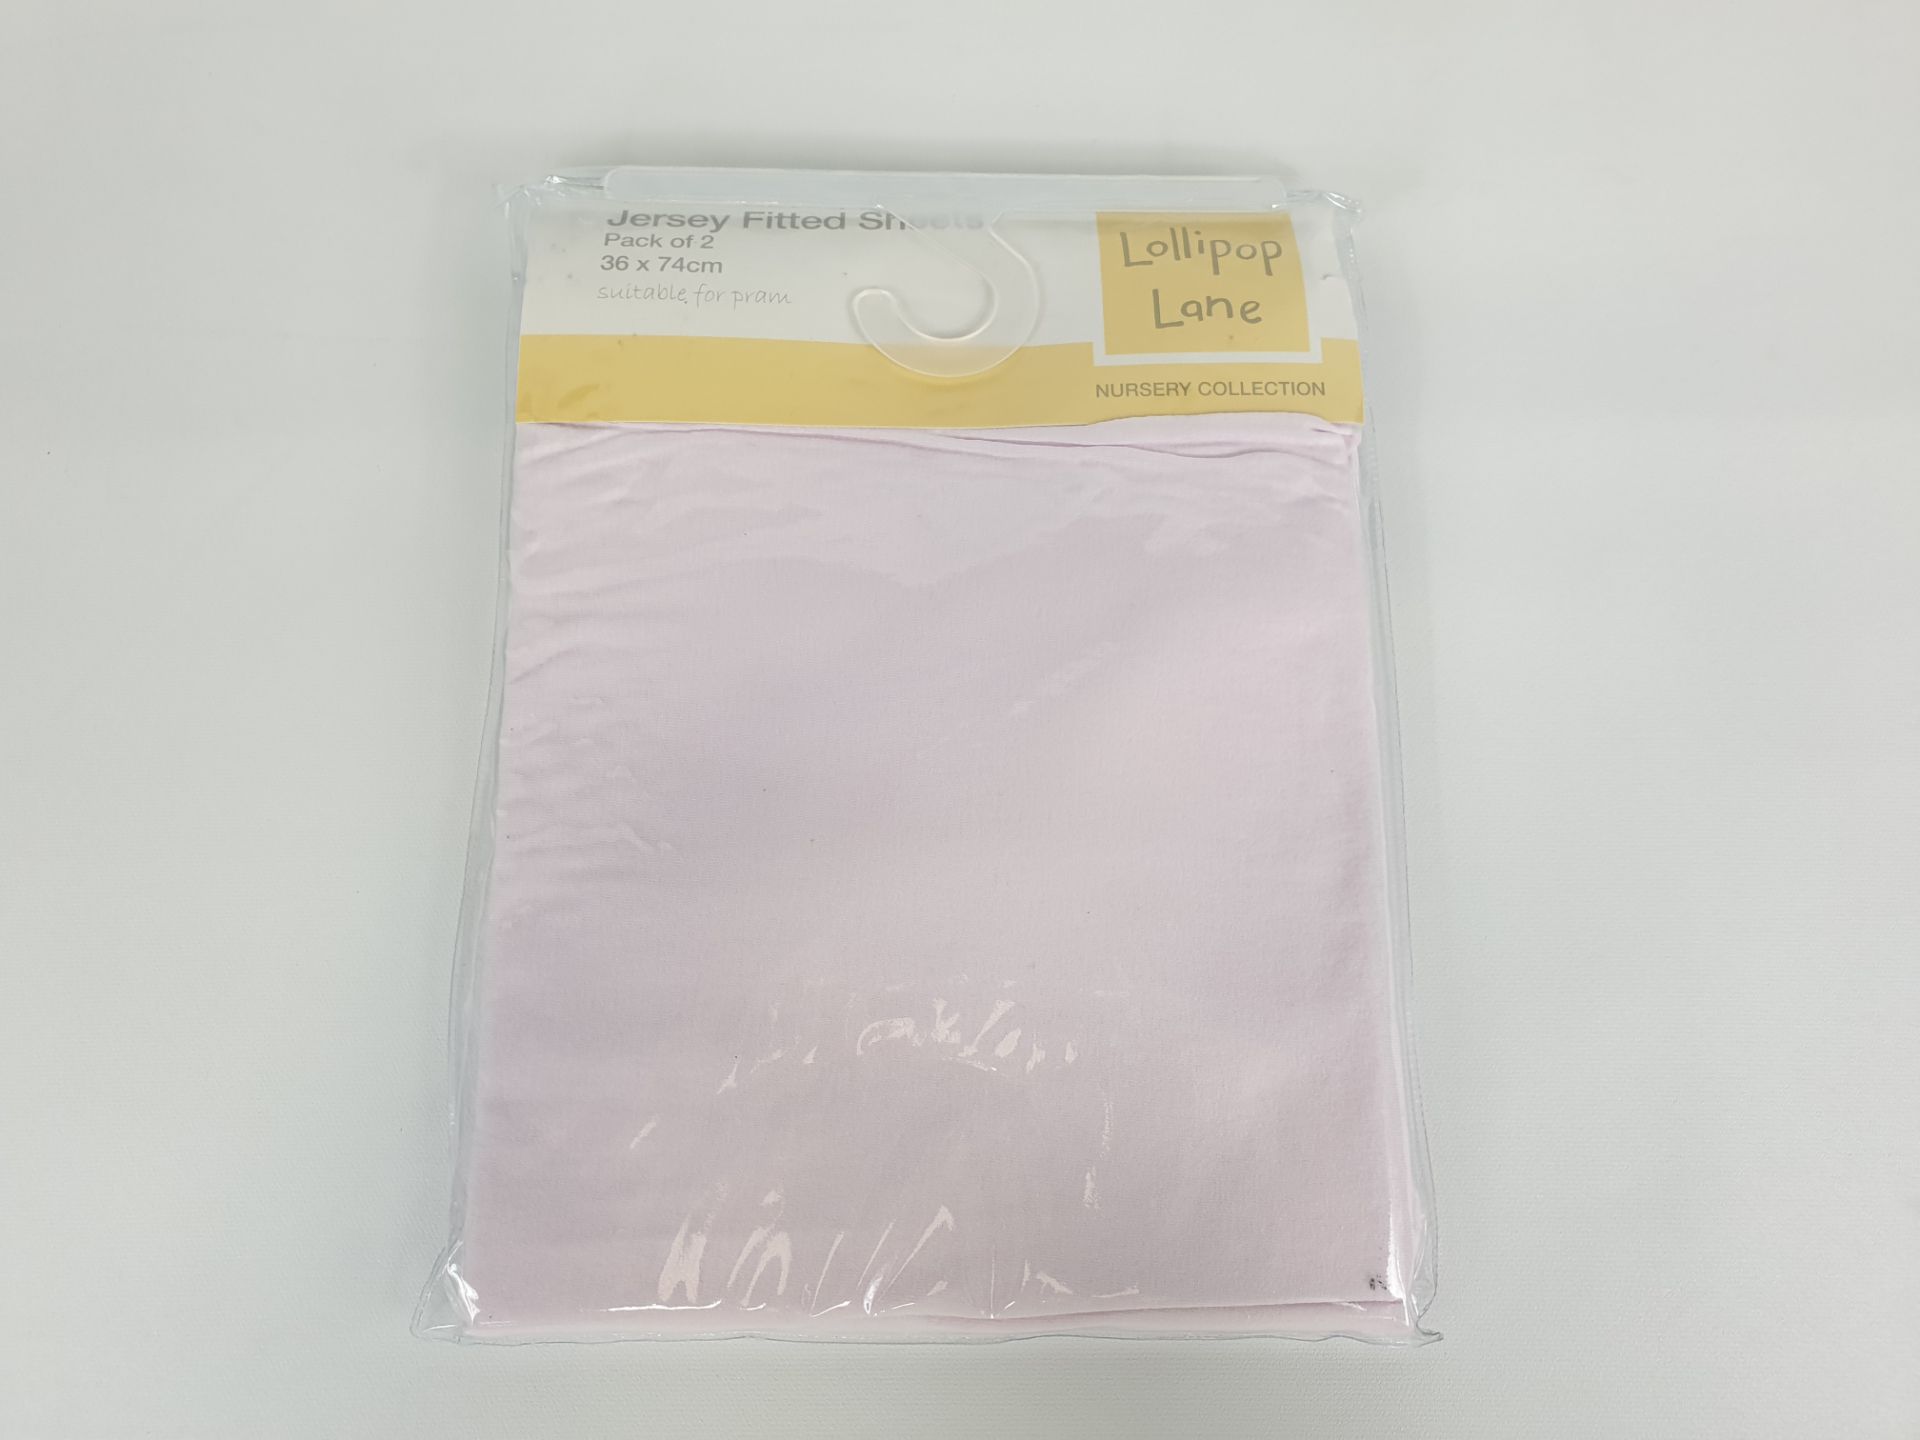 24 X PACKS OF 2 PINK LOLLIPOP LANE JERSEY FITTED SHEETS SIZE 36 X 74 CM